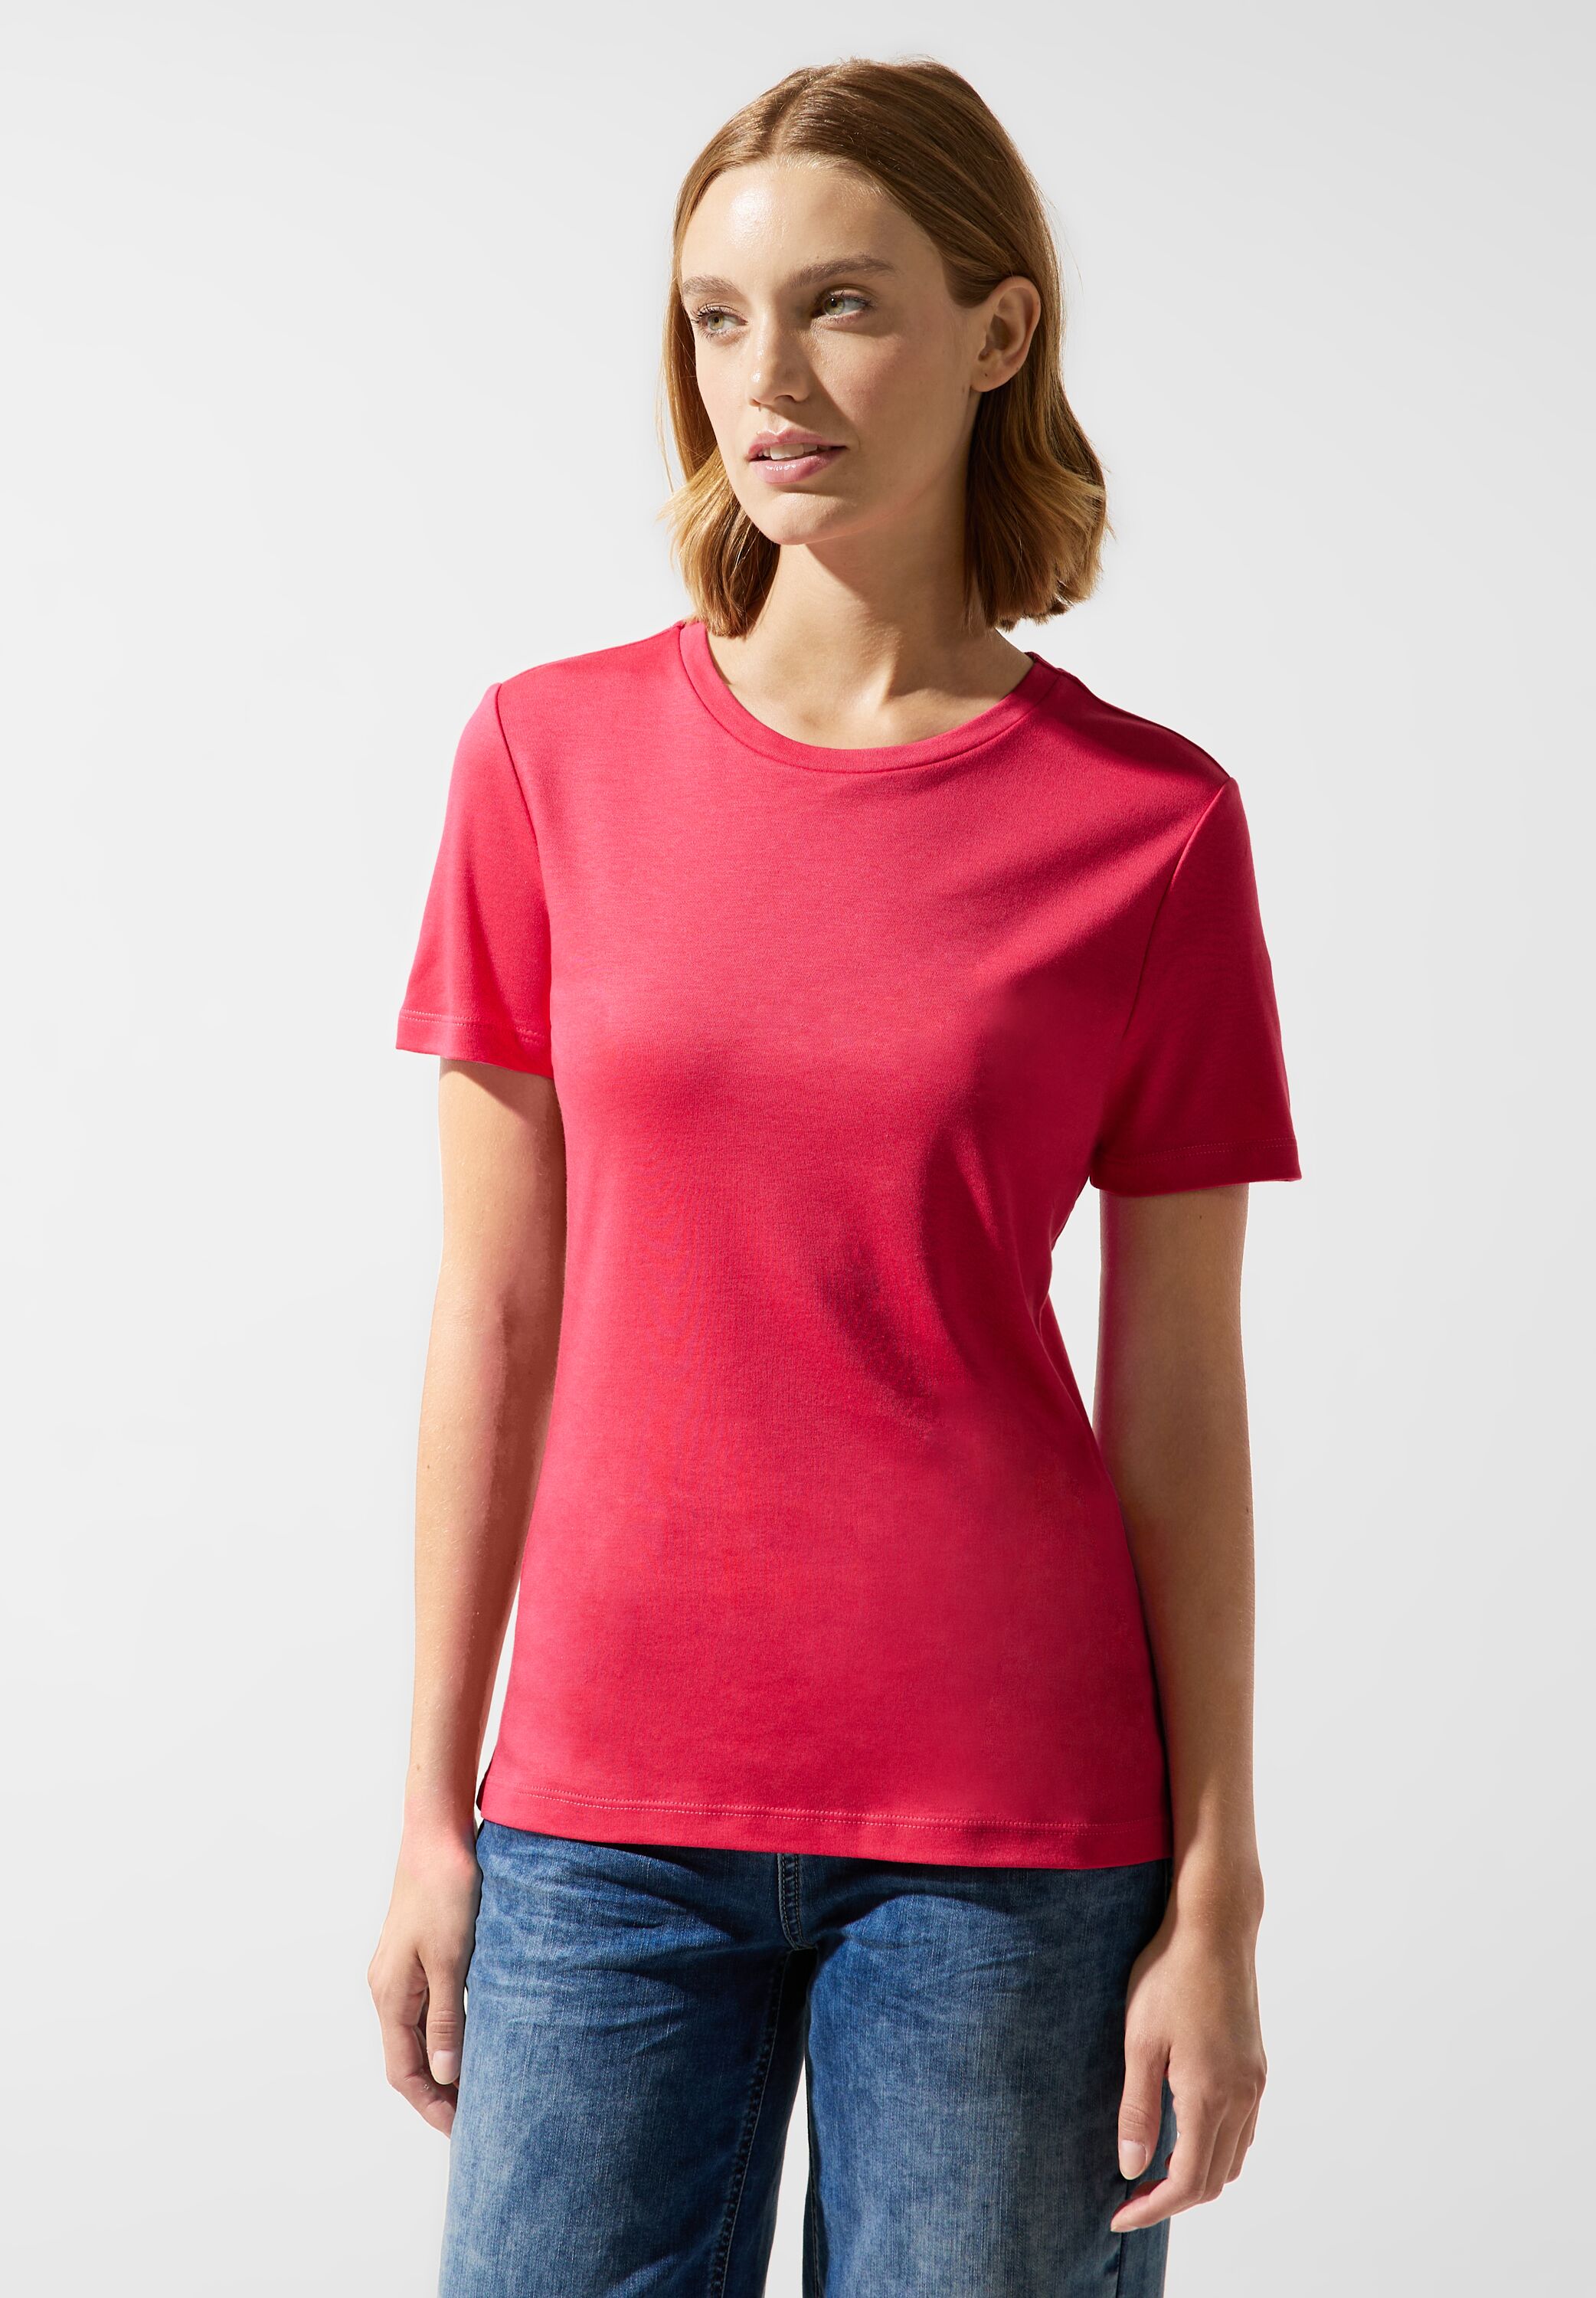 Street One T-Shirt im CONCEPT Coral in Blossom Mode SALE - reduziert A320321-15190